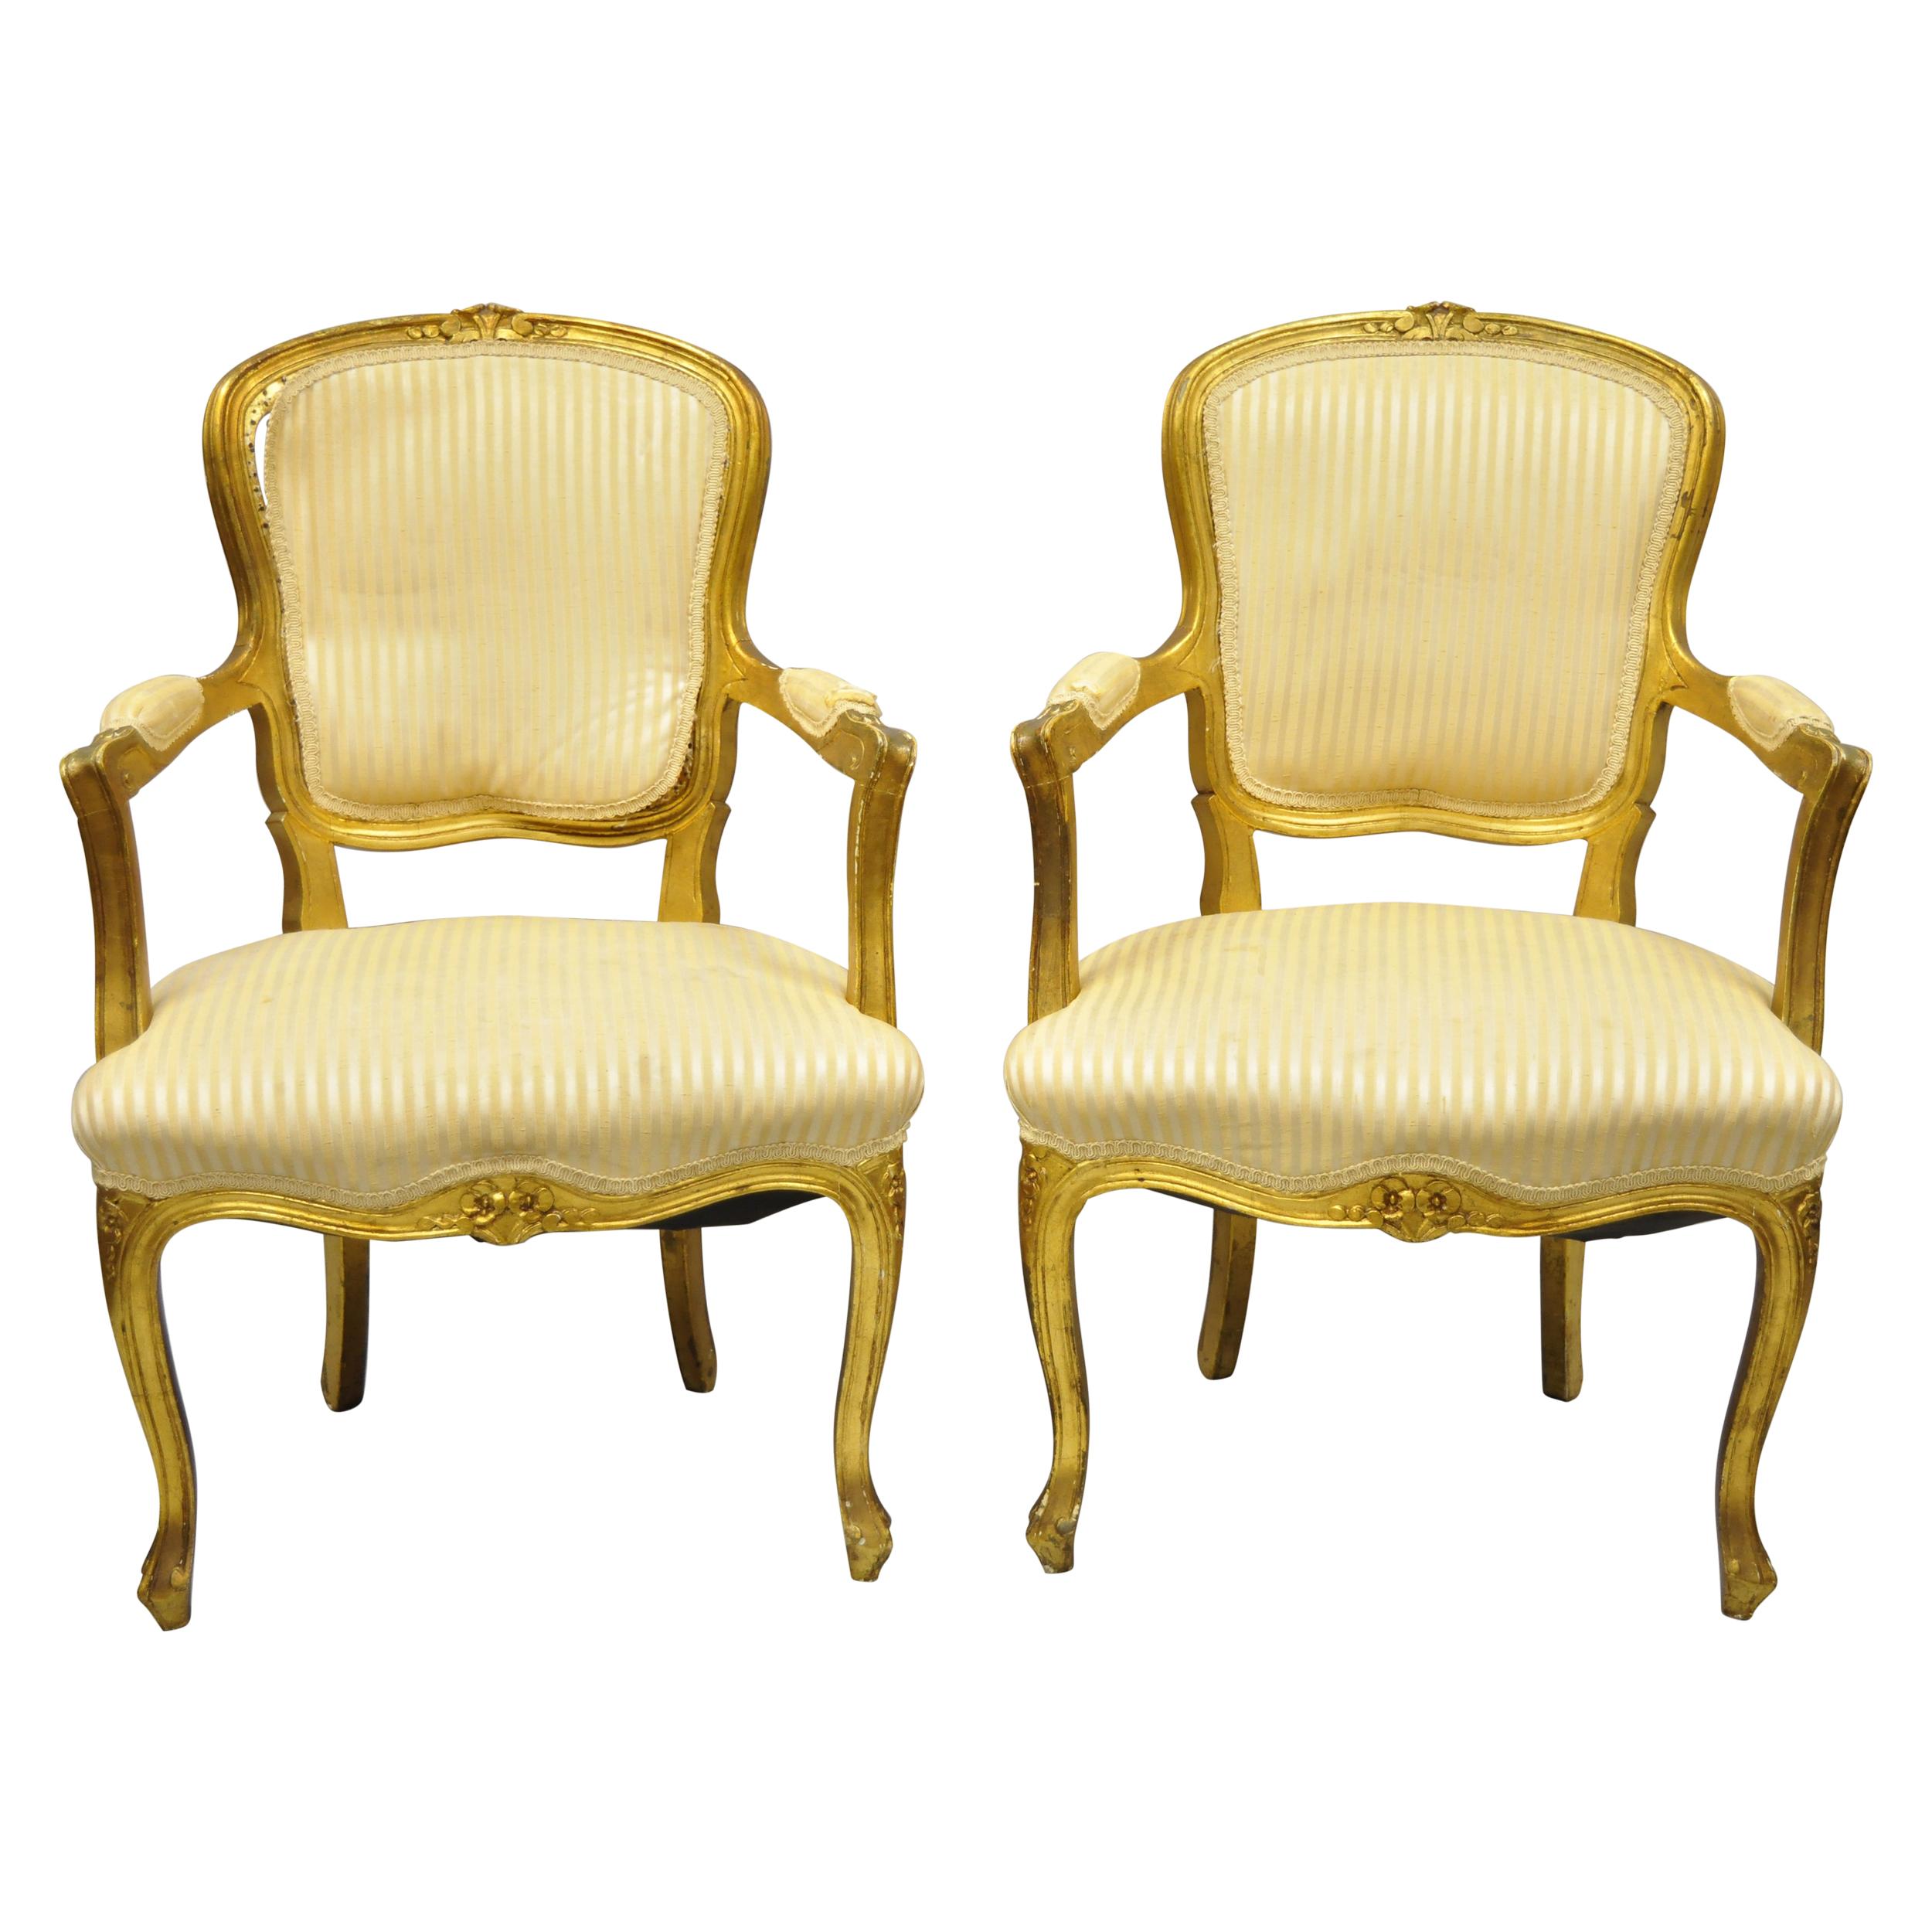 French Louis XV Style Gold Gilt Fauteuil Arm Chairs to Refinish DIY, a Pair